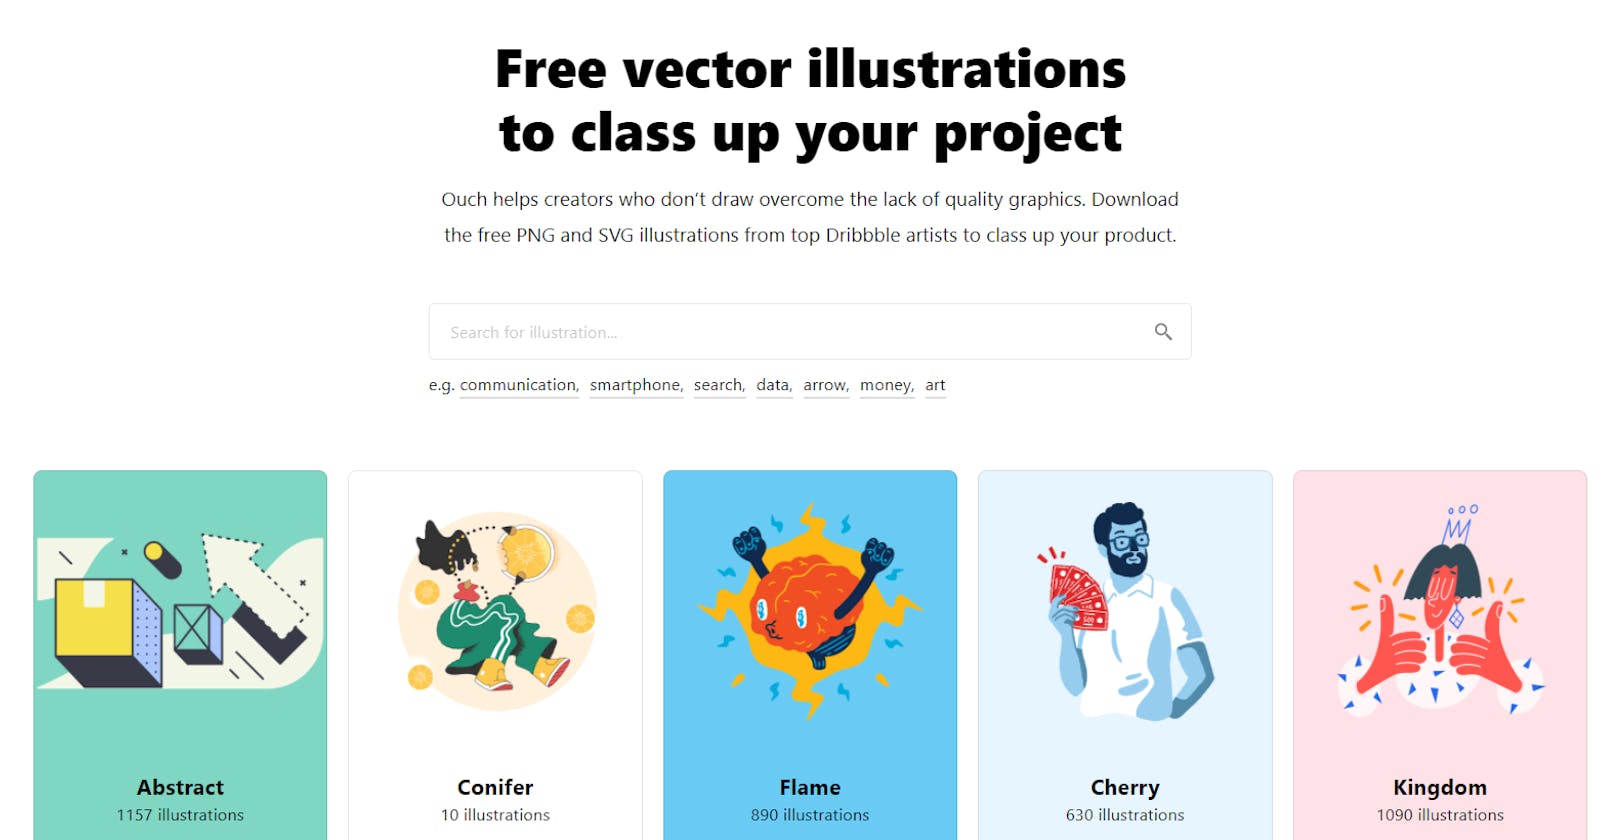 7 best illustration resources to use in your next project